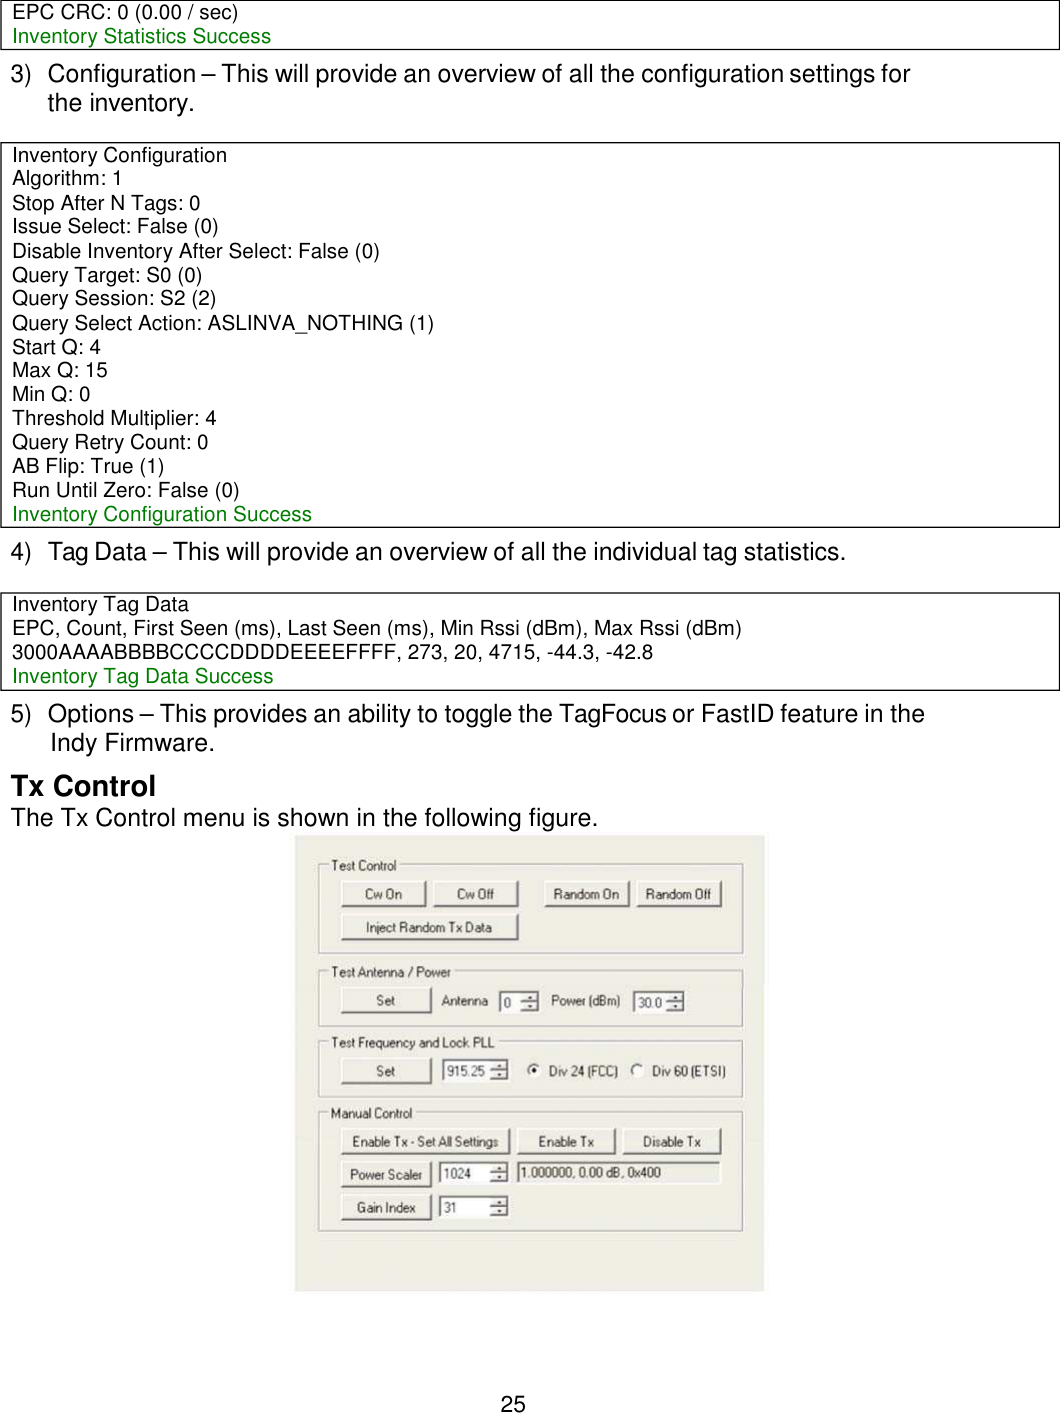 25      3) Configuration – This will provide an overview of all the configuration settings for the inventory.   4) Tag Data – This will provide an overview of all the individual tag statistics.   5) Options – This provides an ability to toggle the TagFocus or FastID feature in the Indy Firmware. Tx Control The Tx Control menu is shown in the following figure.  EPC CRC: 0 (0.00 / sec) Inventory Statistics Success Inventory Configuration Algorithm: 1 Stop After N Tags: 0 Issue Select: False (0) Disable Inventory After Select: False (0) Query Target: S0 (0) Query Session: S2 (2) Query Select Action: ASLINVA_NOTHING (1) Start Q: 4 Max Q: 15 Min Q: 0 Threshold Multiplier: 4 Query Retry Count: 0 AB Flip: True (1) Run Until Zero: False (0) Inventory Configuration Success Inventory Tag Data EPC, Count, First Seen (ms), Last Seen (ms), Min Rssi (dBm), Max Rssi (dBm) 3000AAAABBBBCCCCDDDDEEEEFFFF, 273, 20, 4715, -44.3, -42.8 Inventory Tag Data Success 